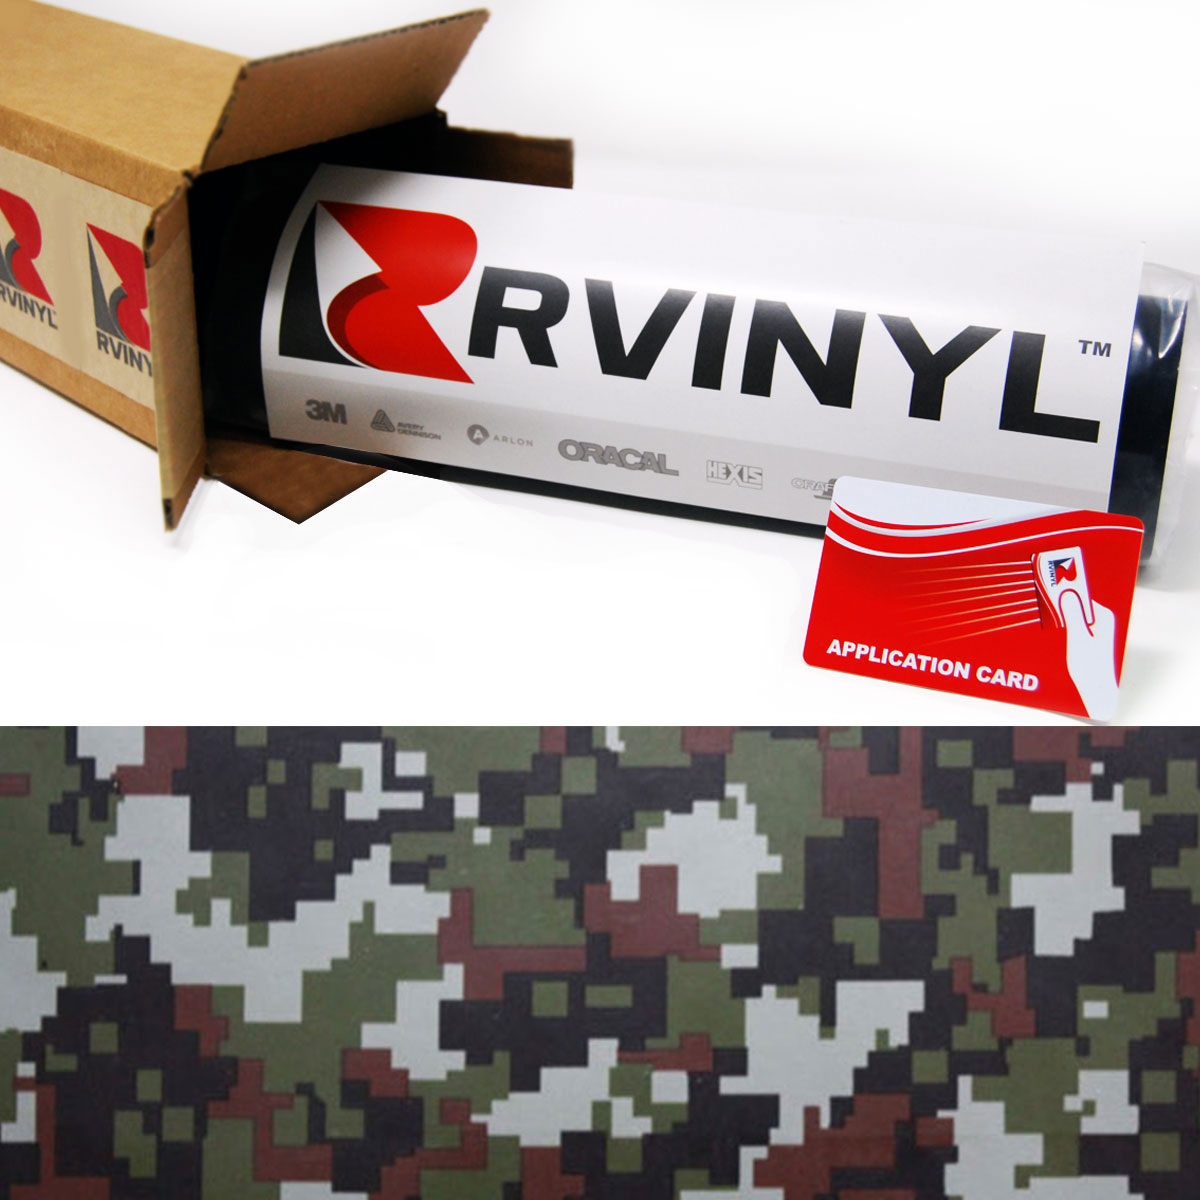 VViViD Vinyl Camouflage Pattern Wrap Air-Release Adhesive Film Sheets (1ft  x 5ft, Snow Camo)